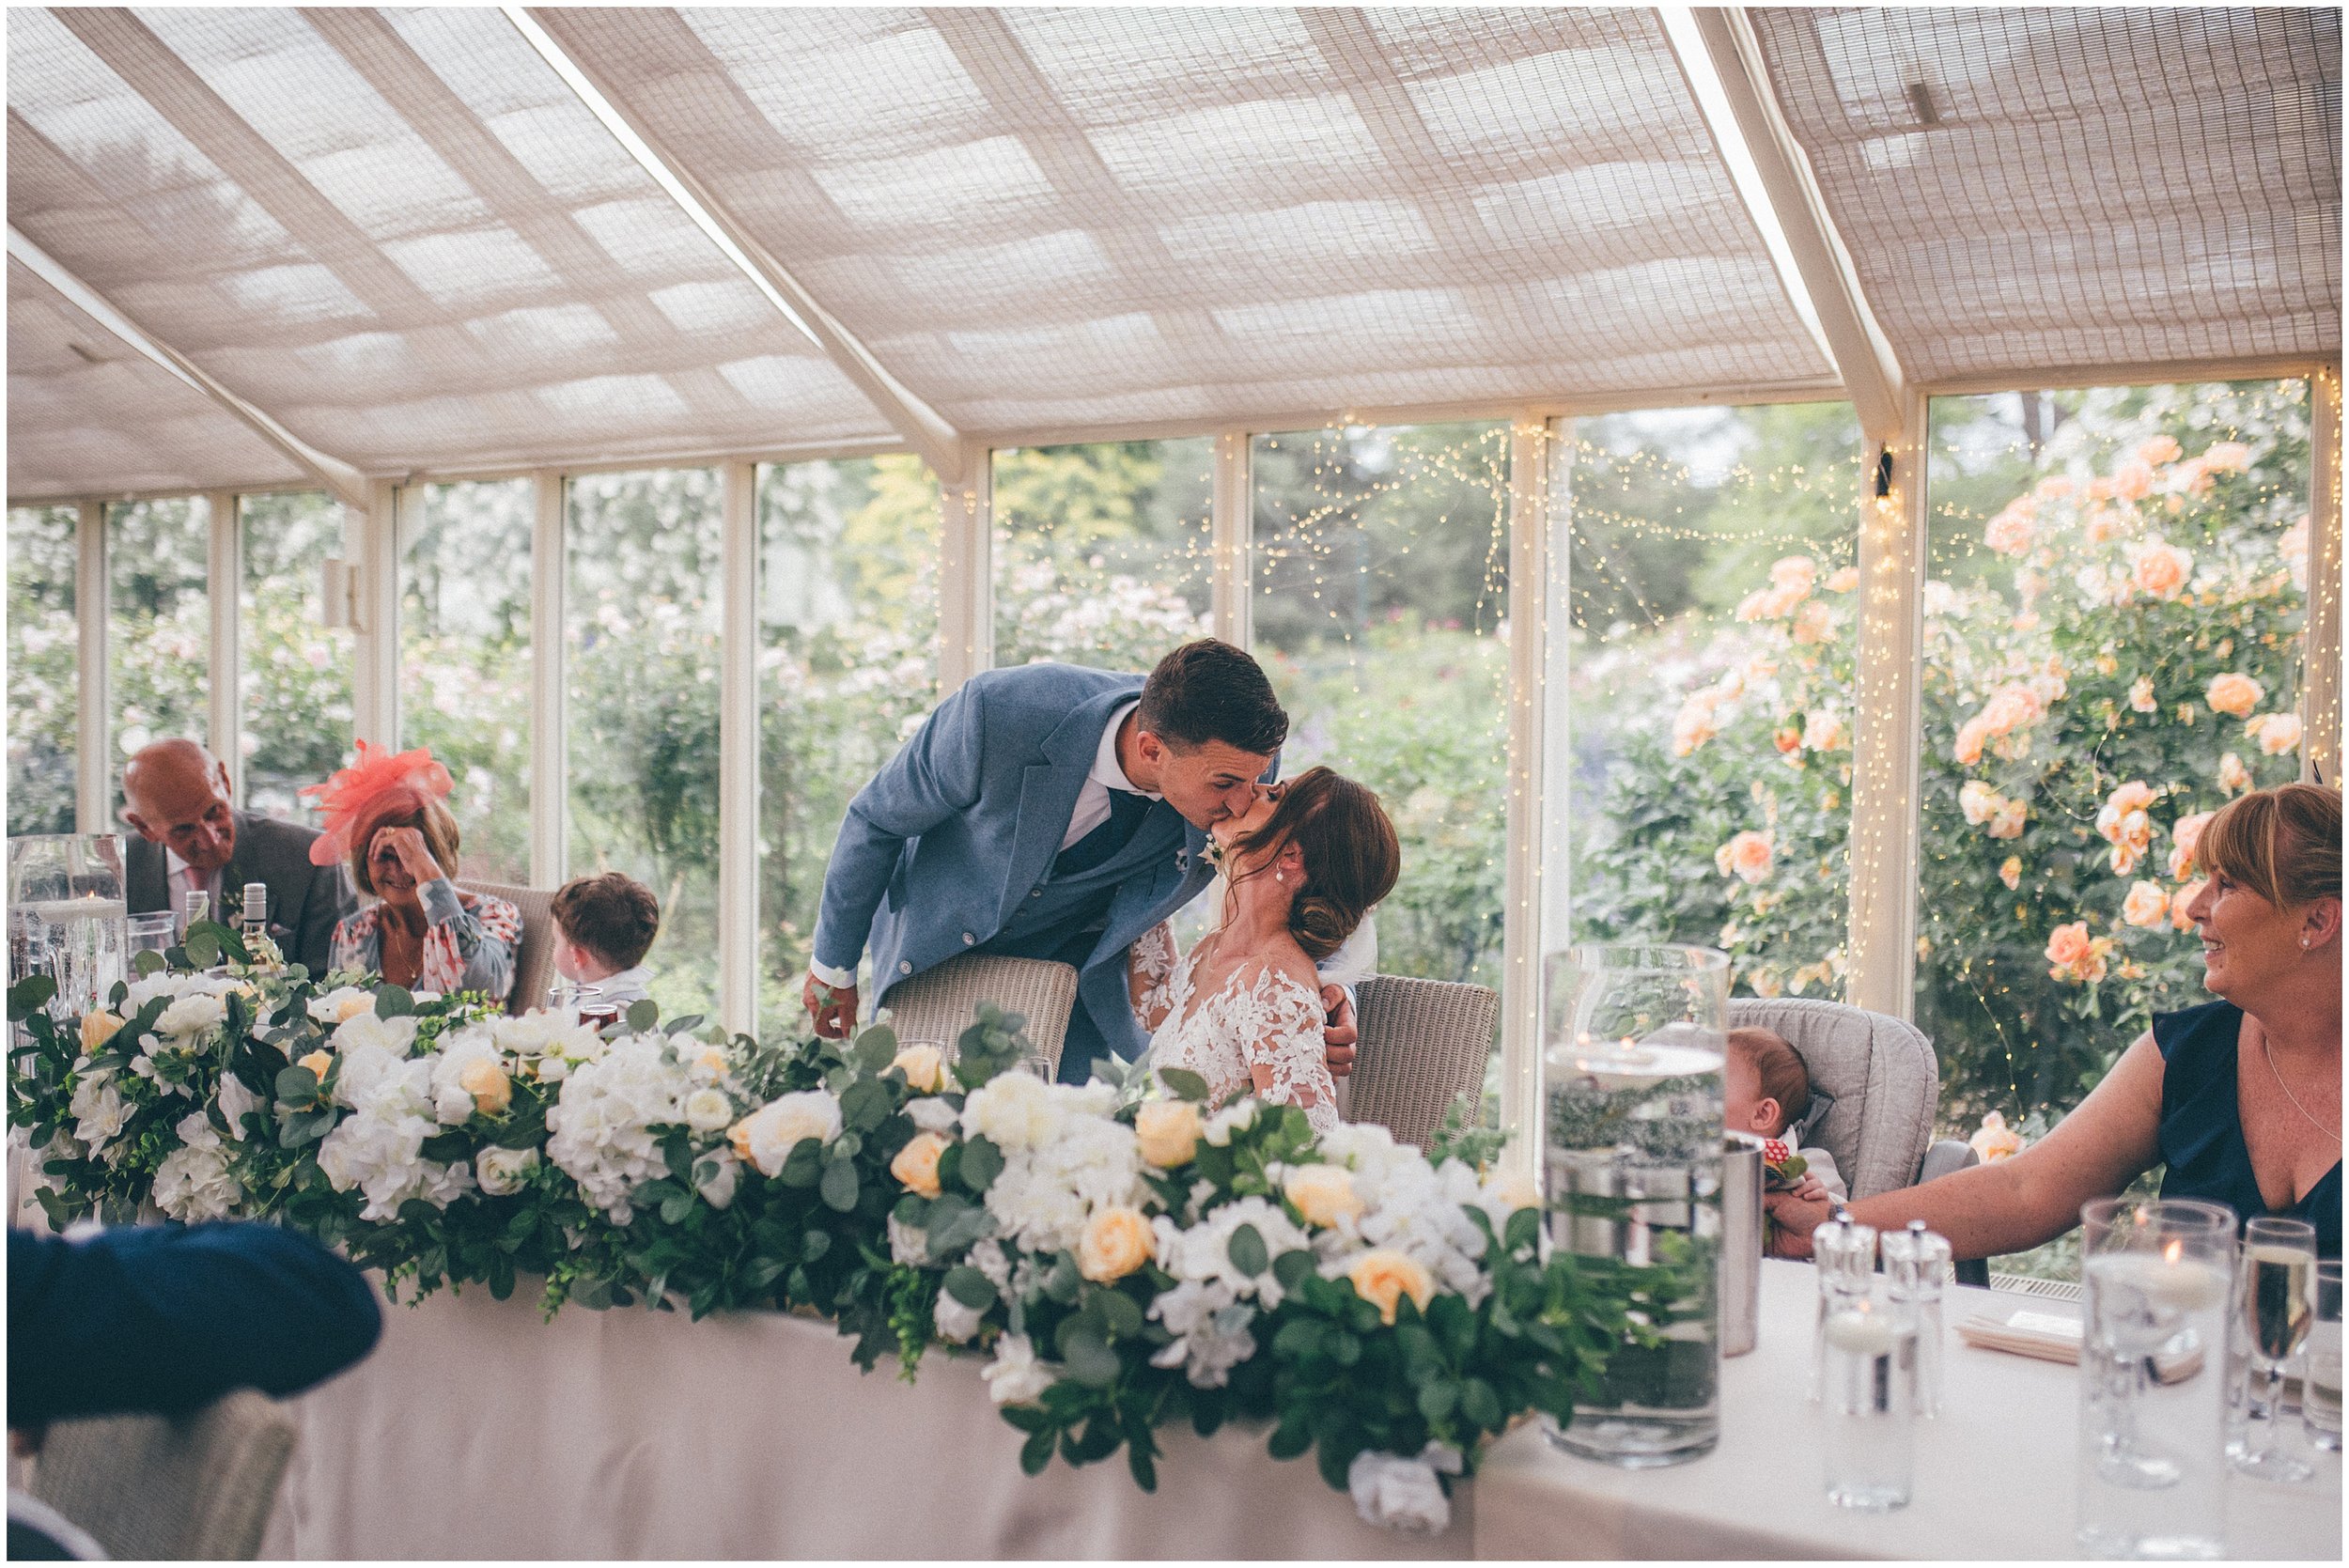 Bride and groom and guests enjoy speeches in the conservatory at Abbeywood Estate in Delamere, Cheshire.